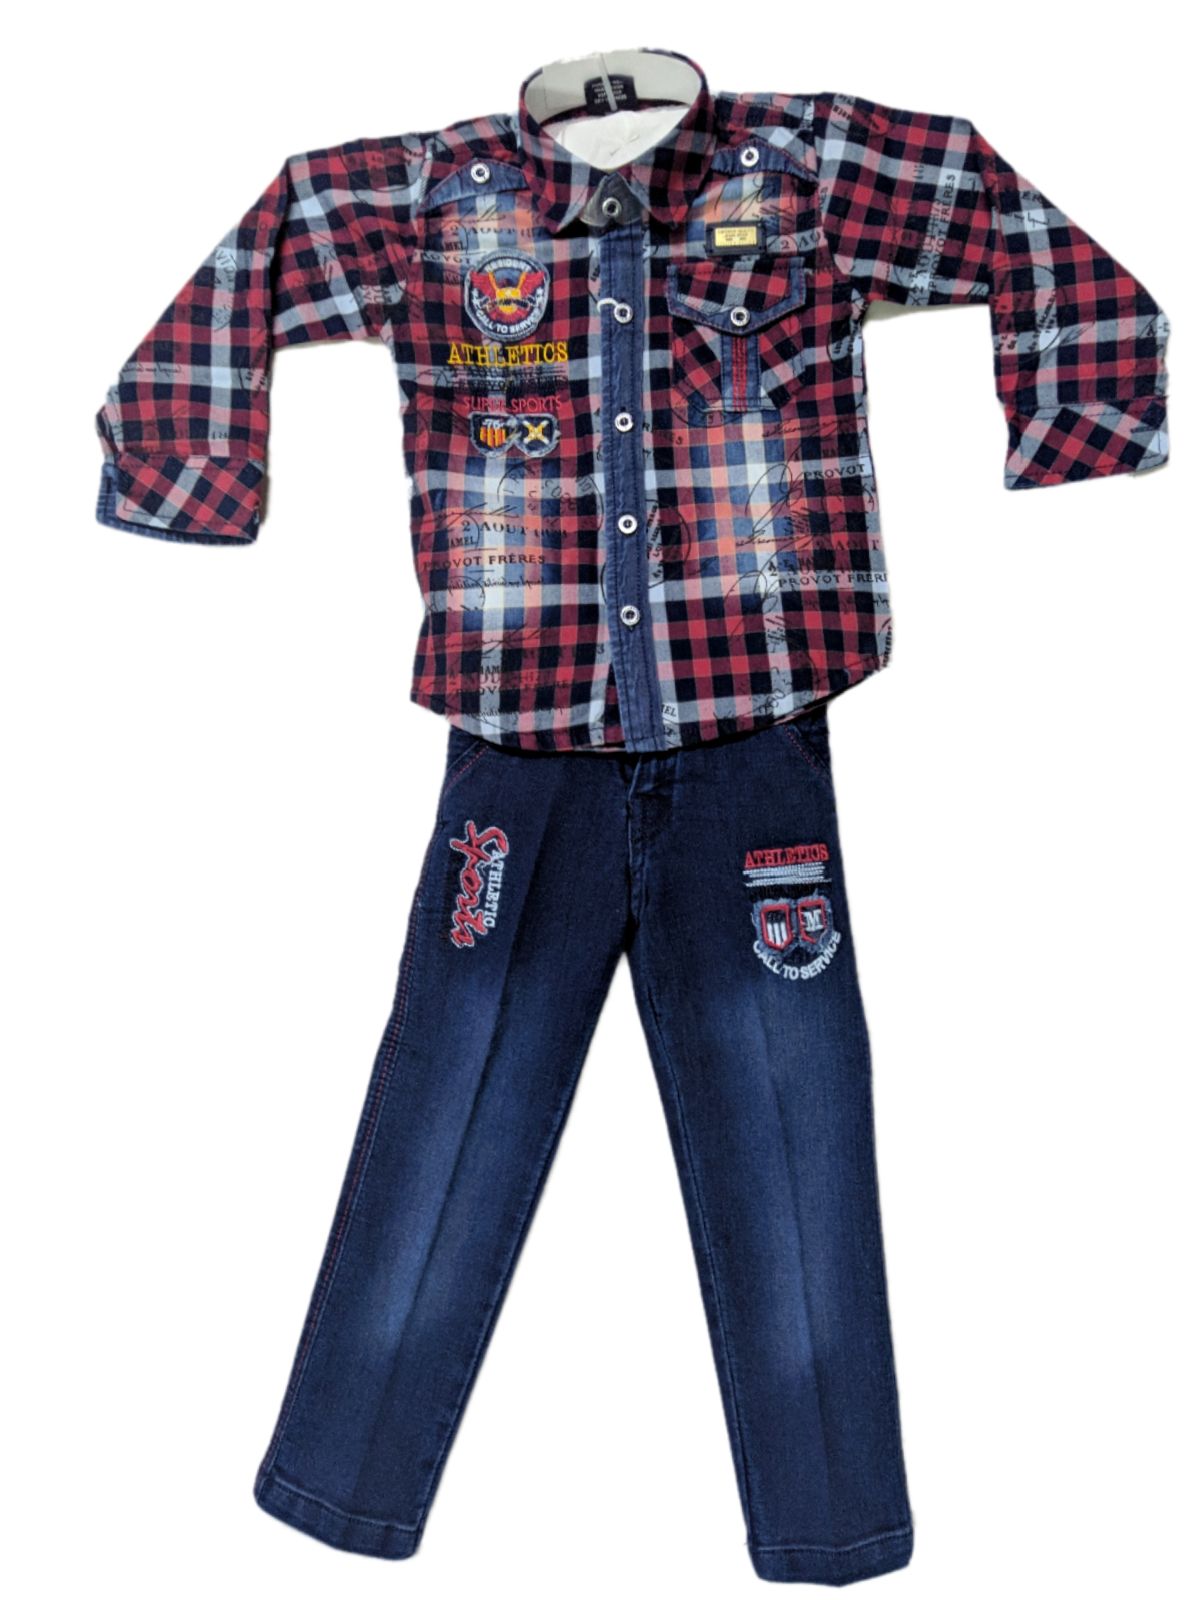 Boys Shirt & Jeans Combo 4-5 Years-205024R